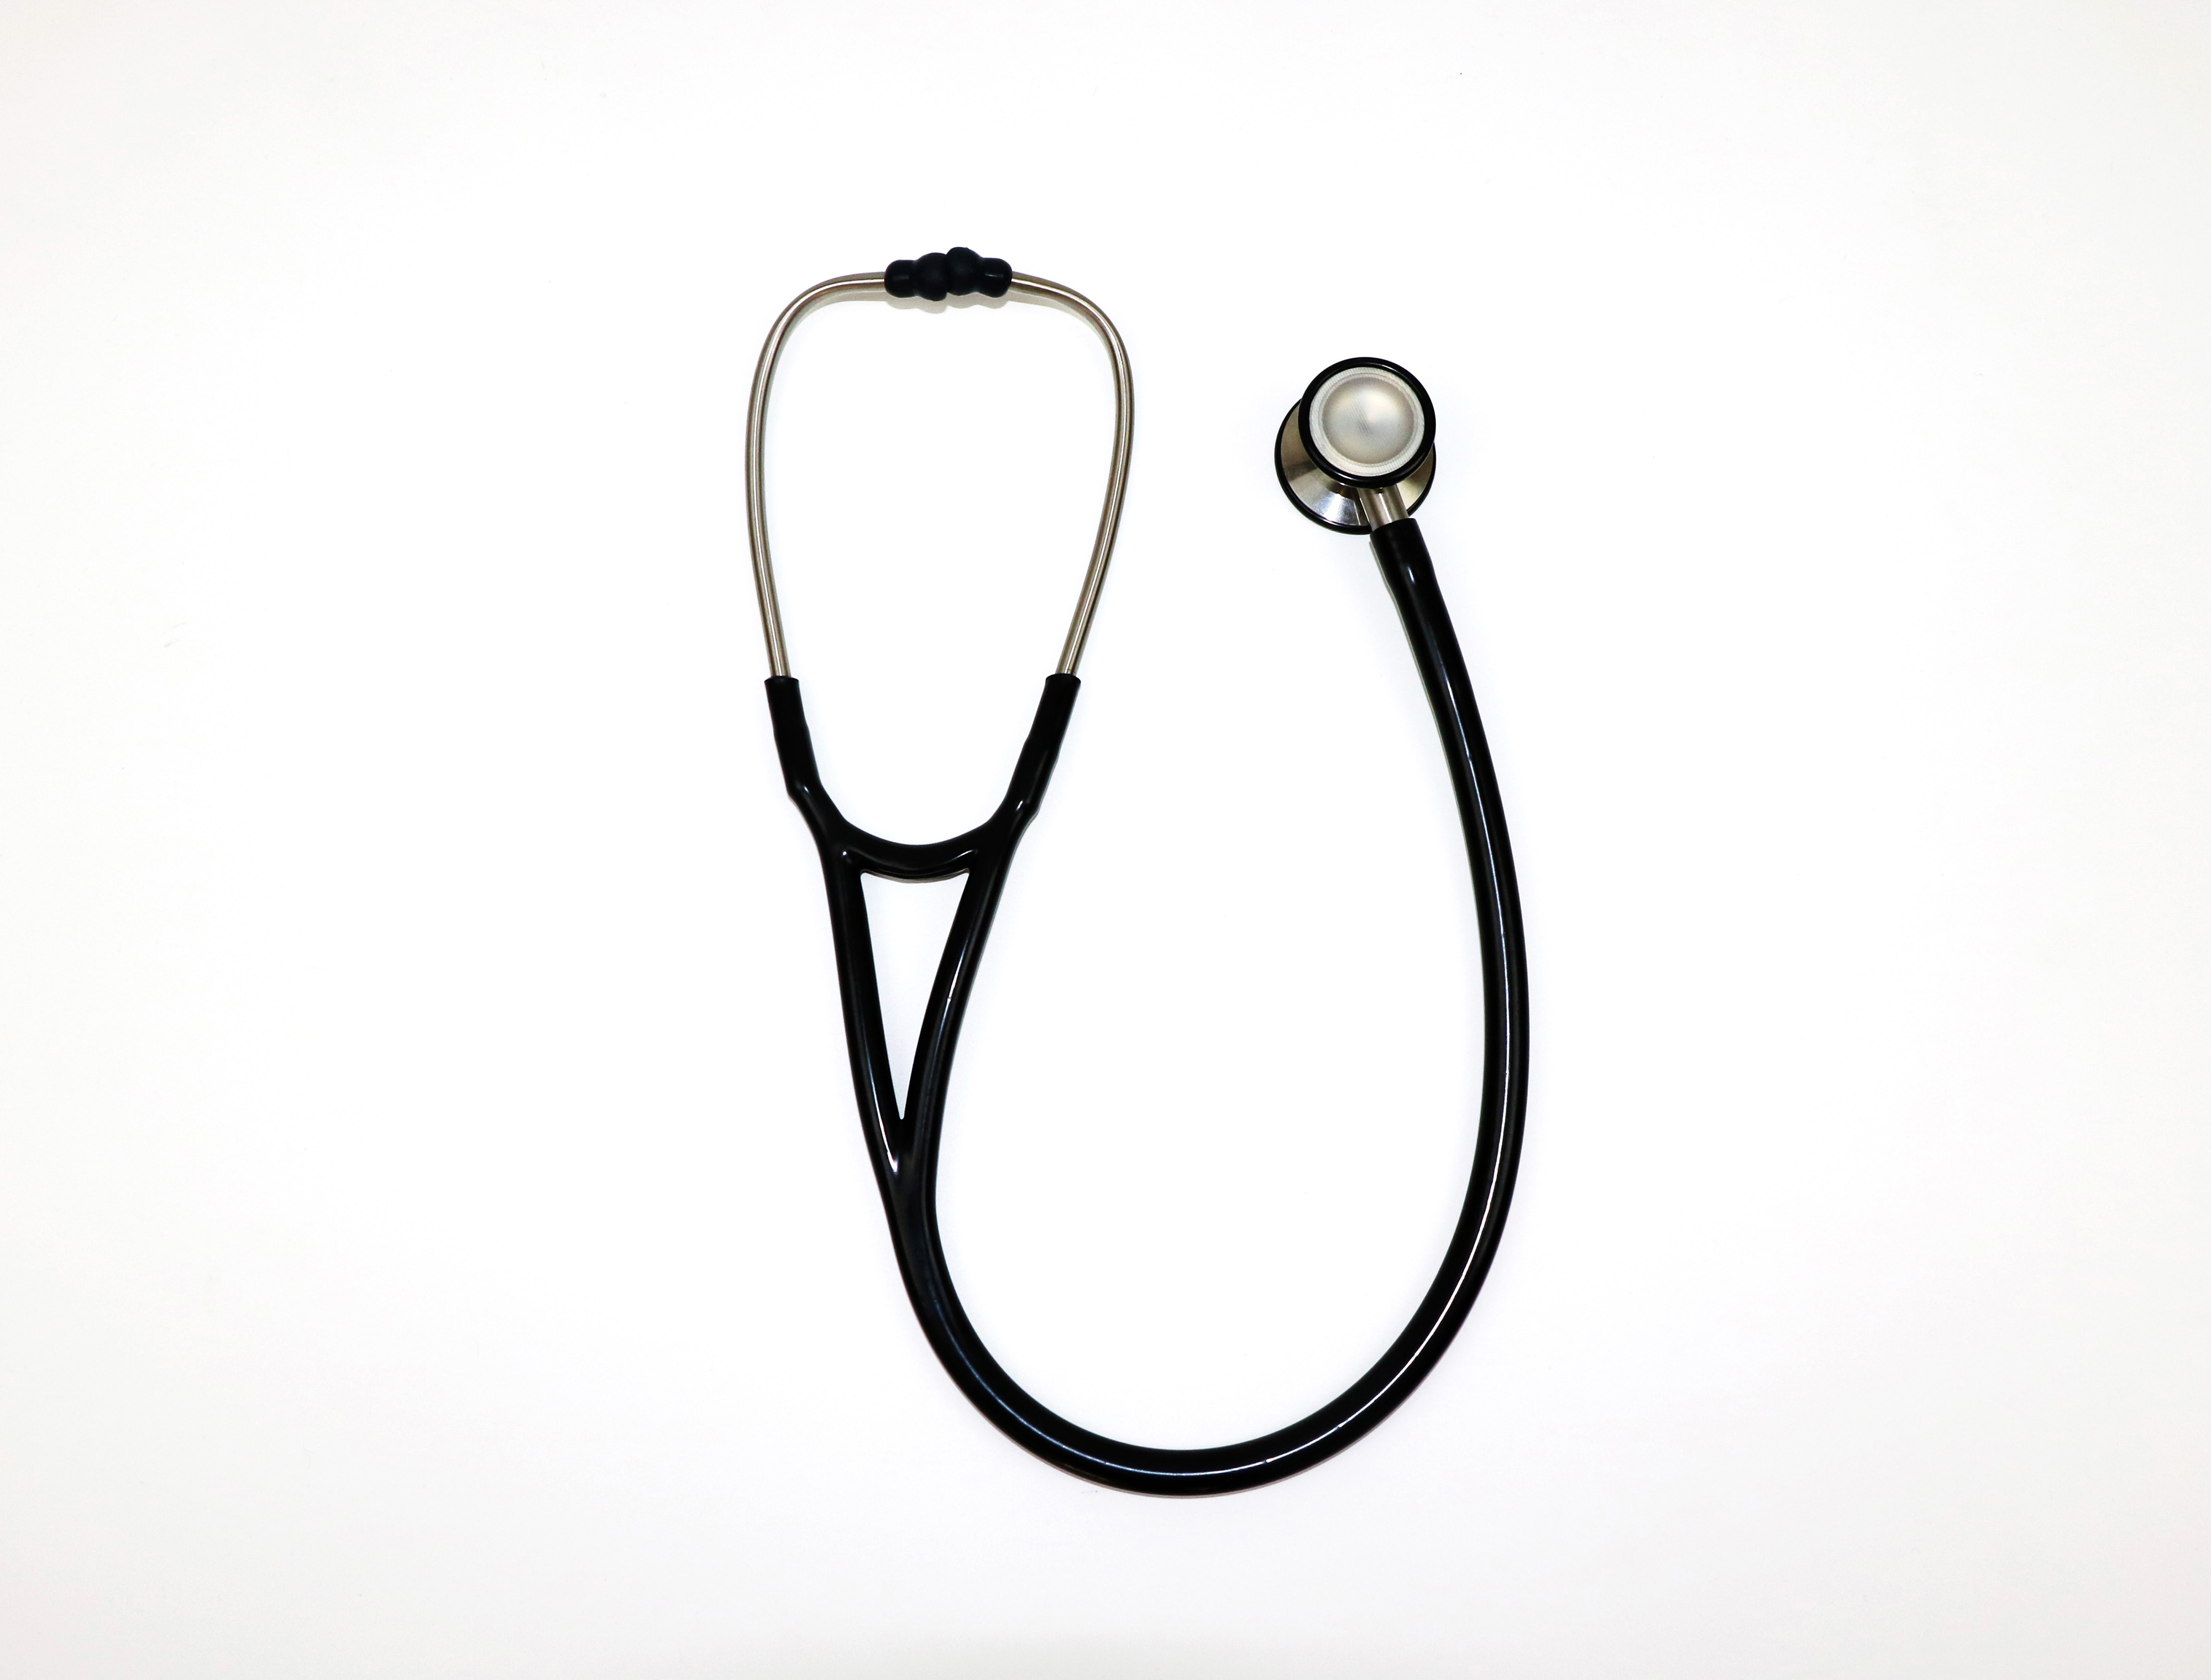 ​What diseases can a stethoscope hear?